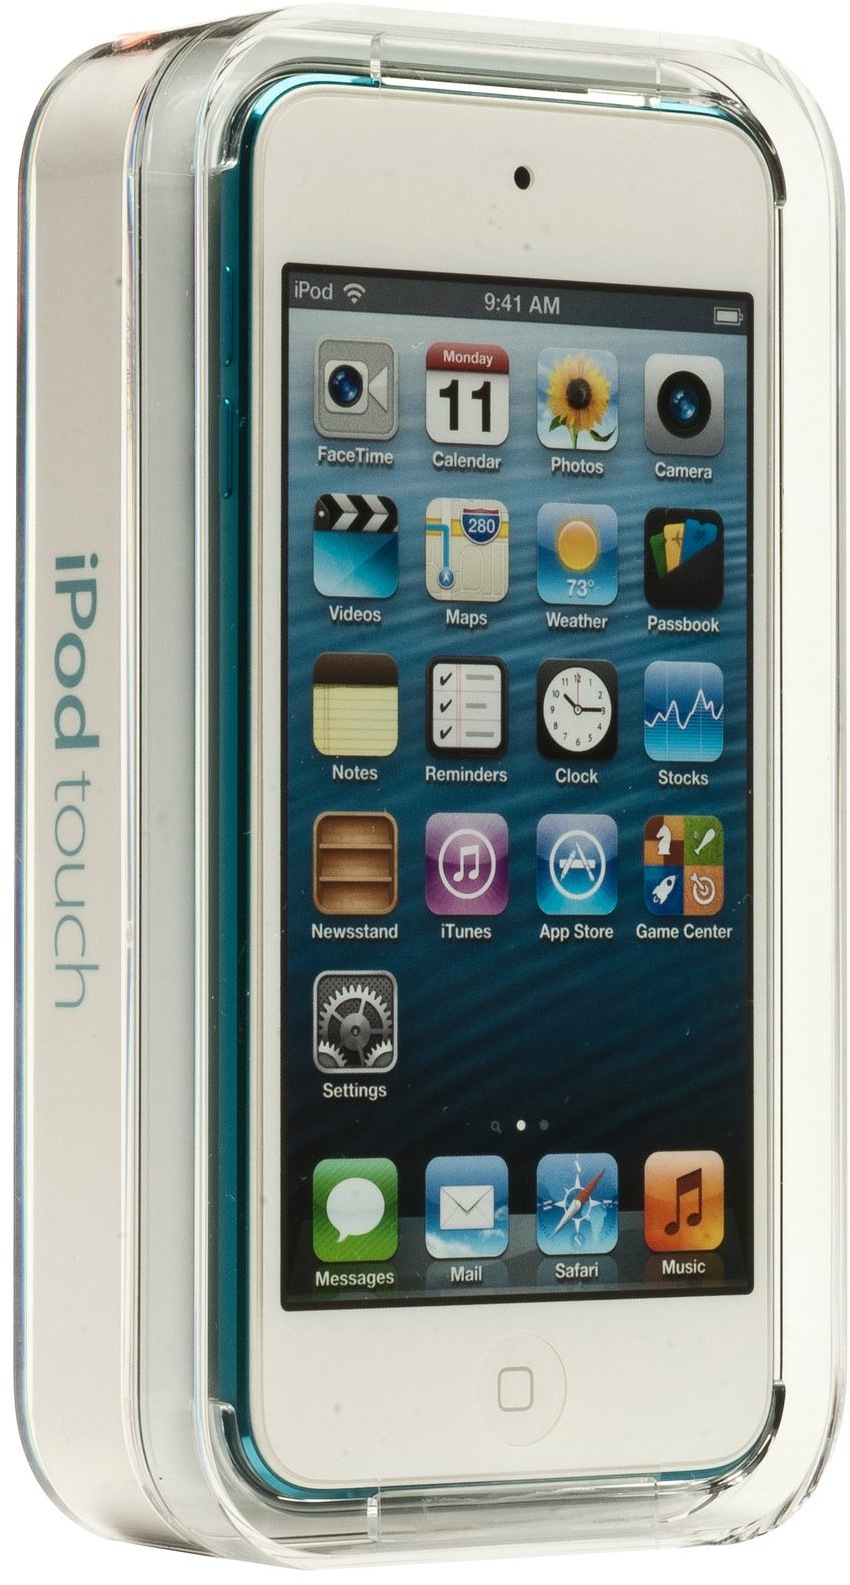 28-embalagem-ipod-touch